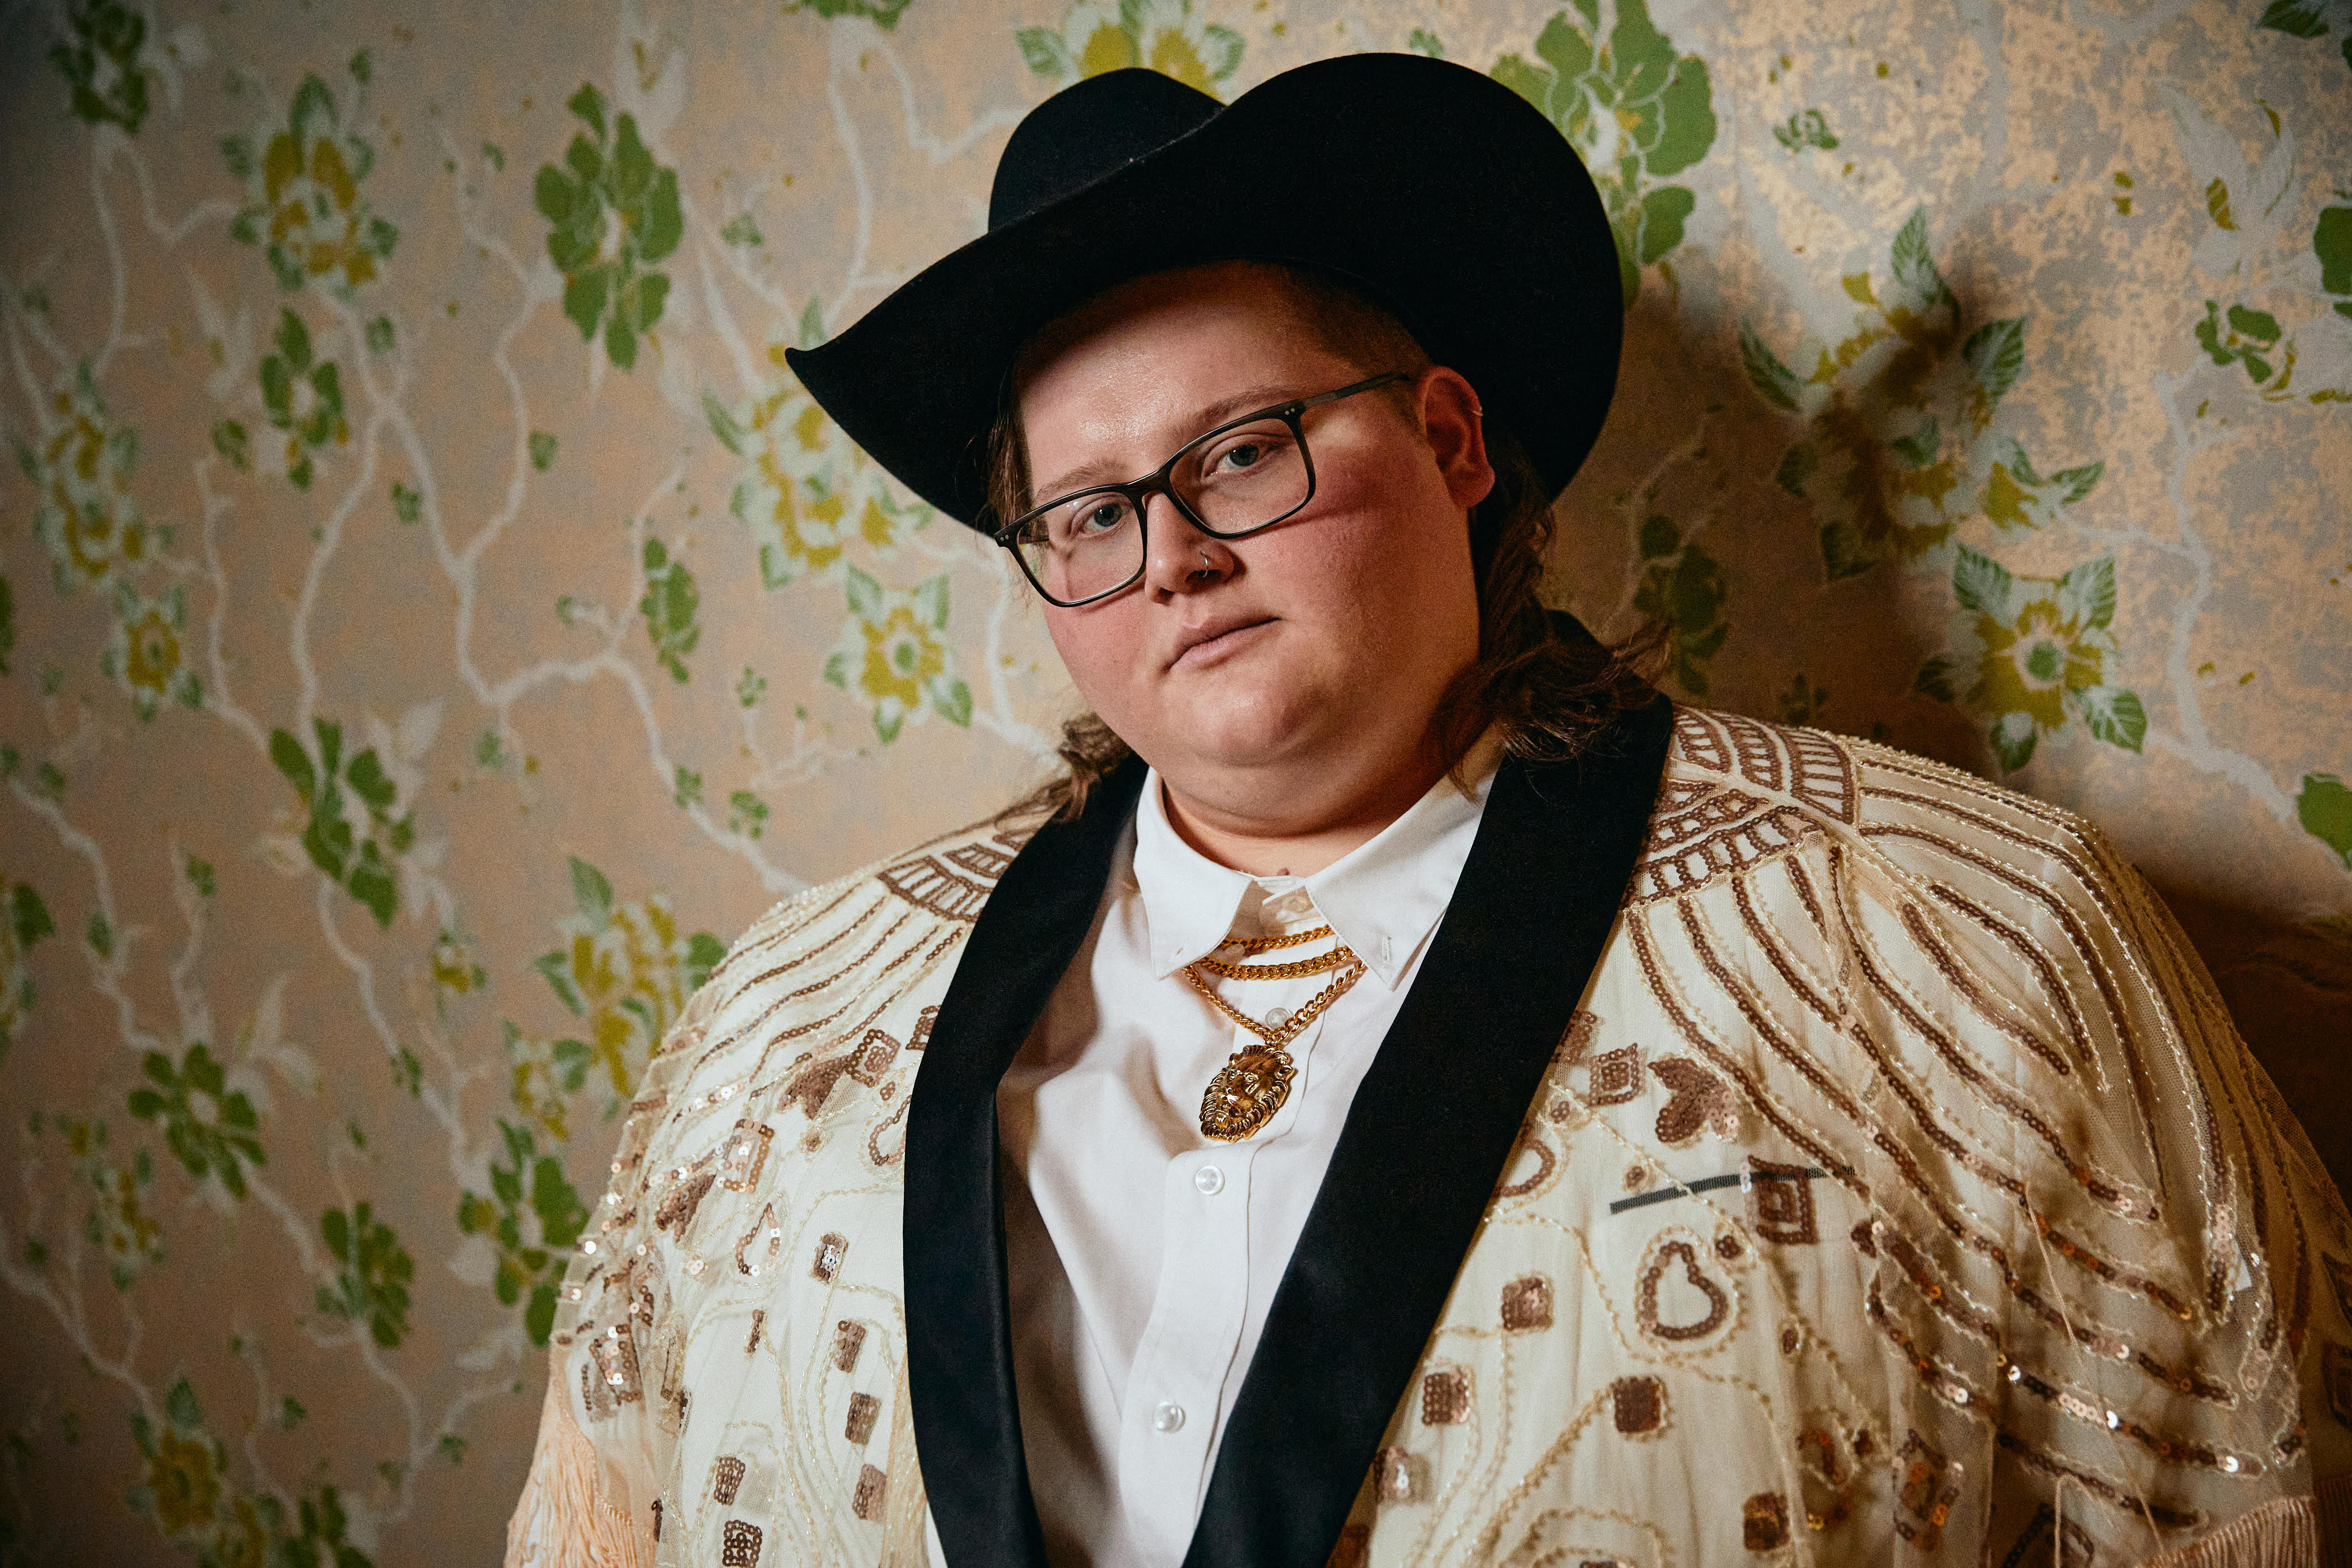 Joshua Ray Walker, wearing a cowboy hat, a flashy jacket and standing against a wallpapered wall.